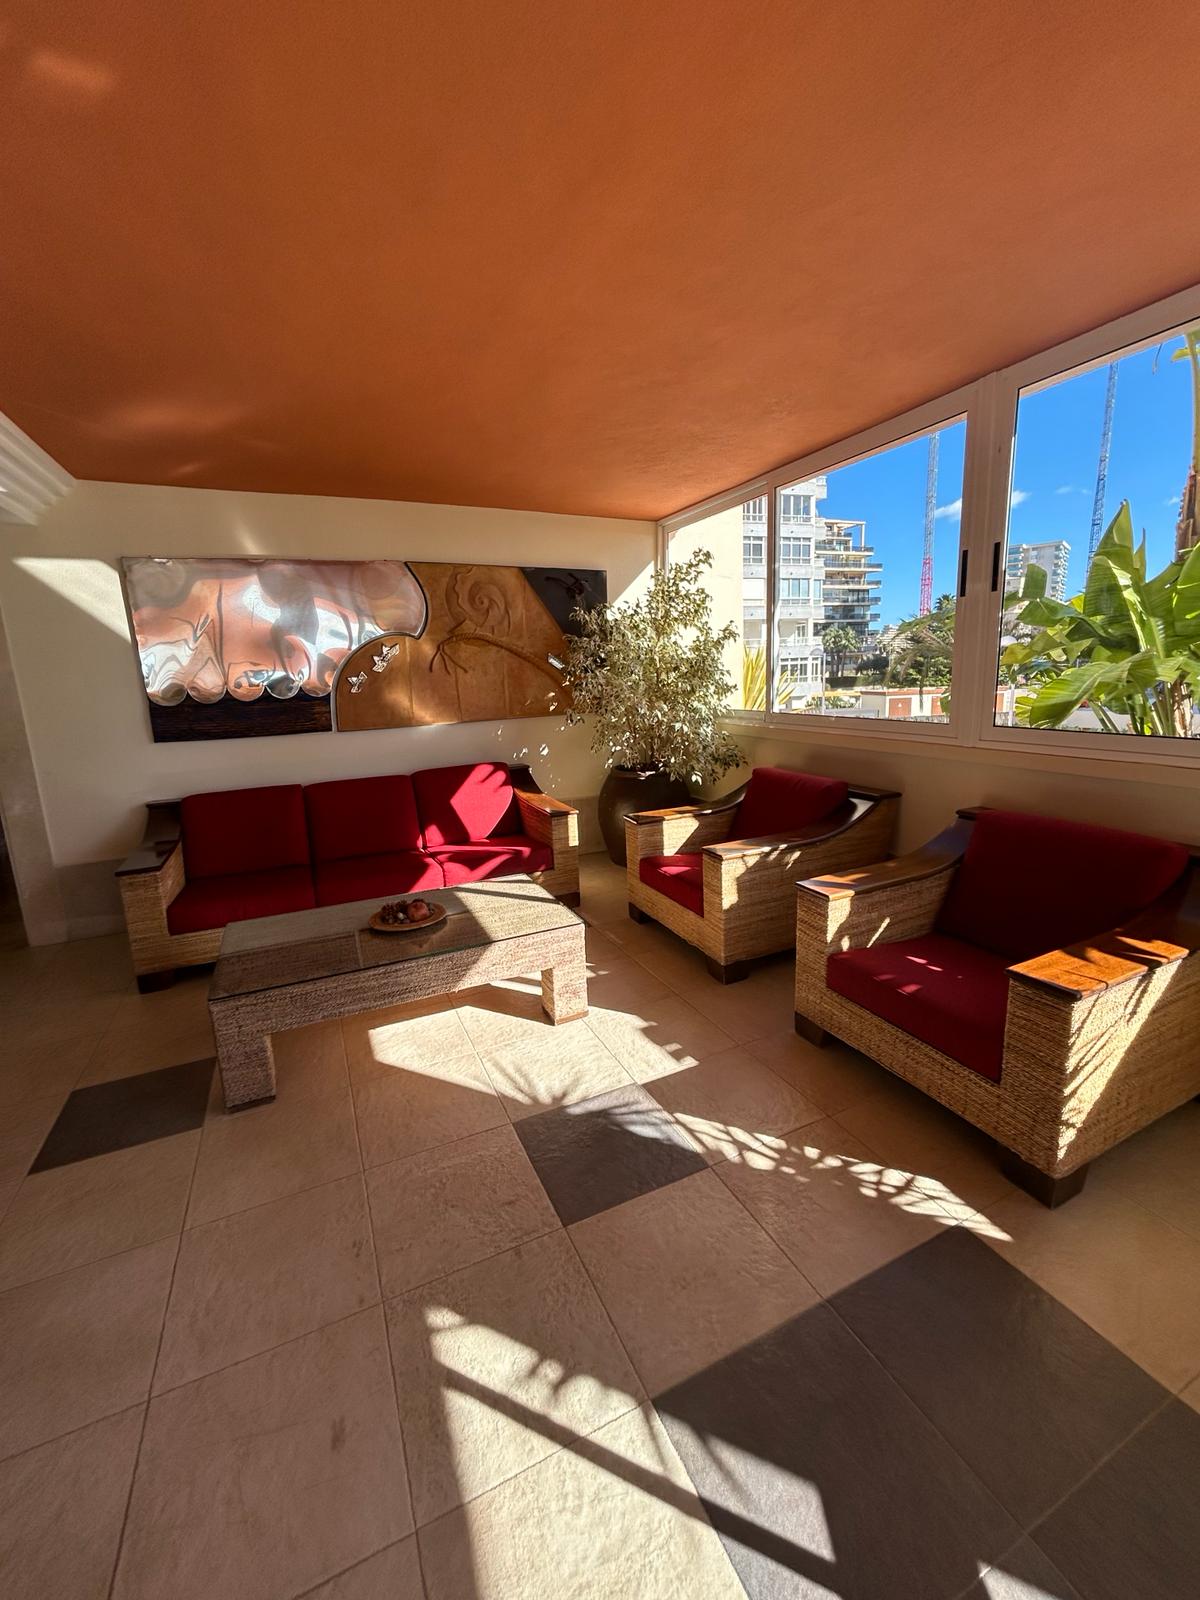 PENTHOUSE FOR SALE ON THE SEAFRONT IN CALPE